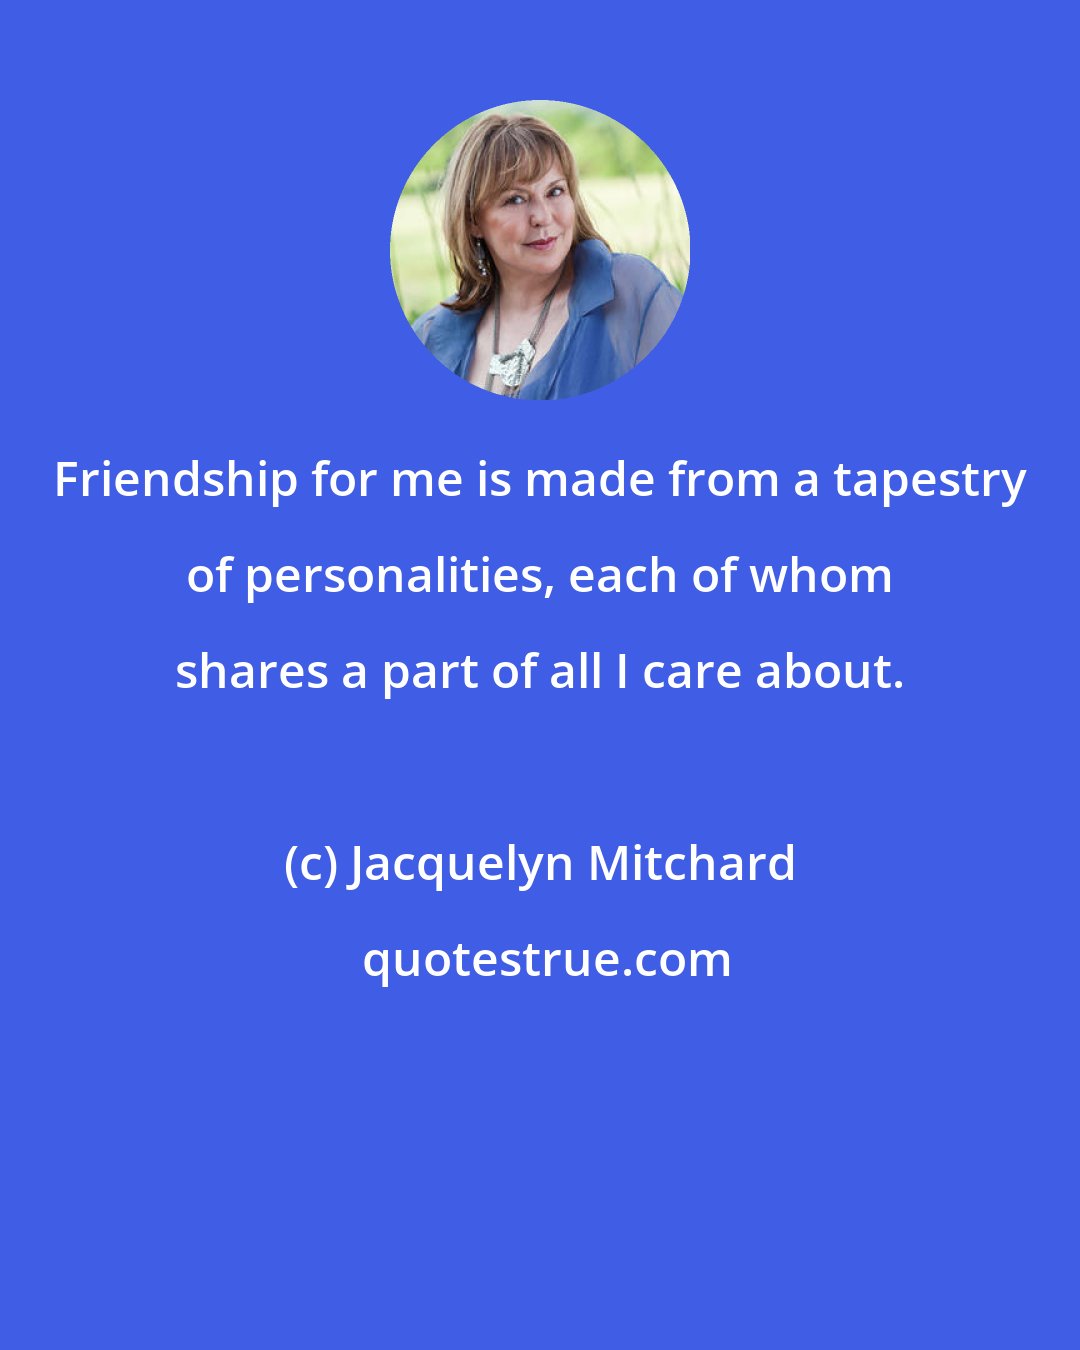 Jacquelyn Mitchard: Friendship for me is made from a tapestry of personalities, each of whom shares a part of all I care about.